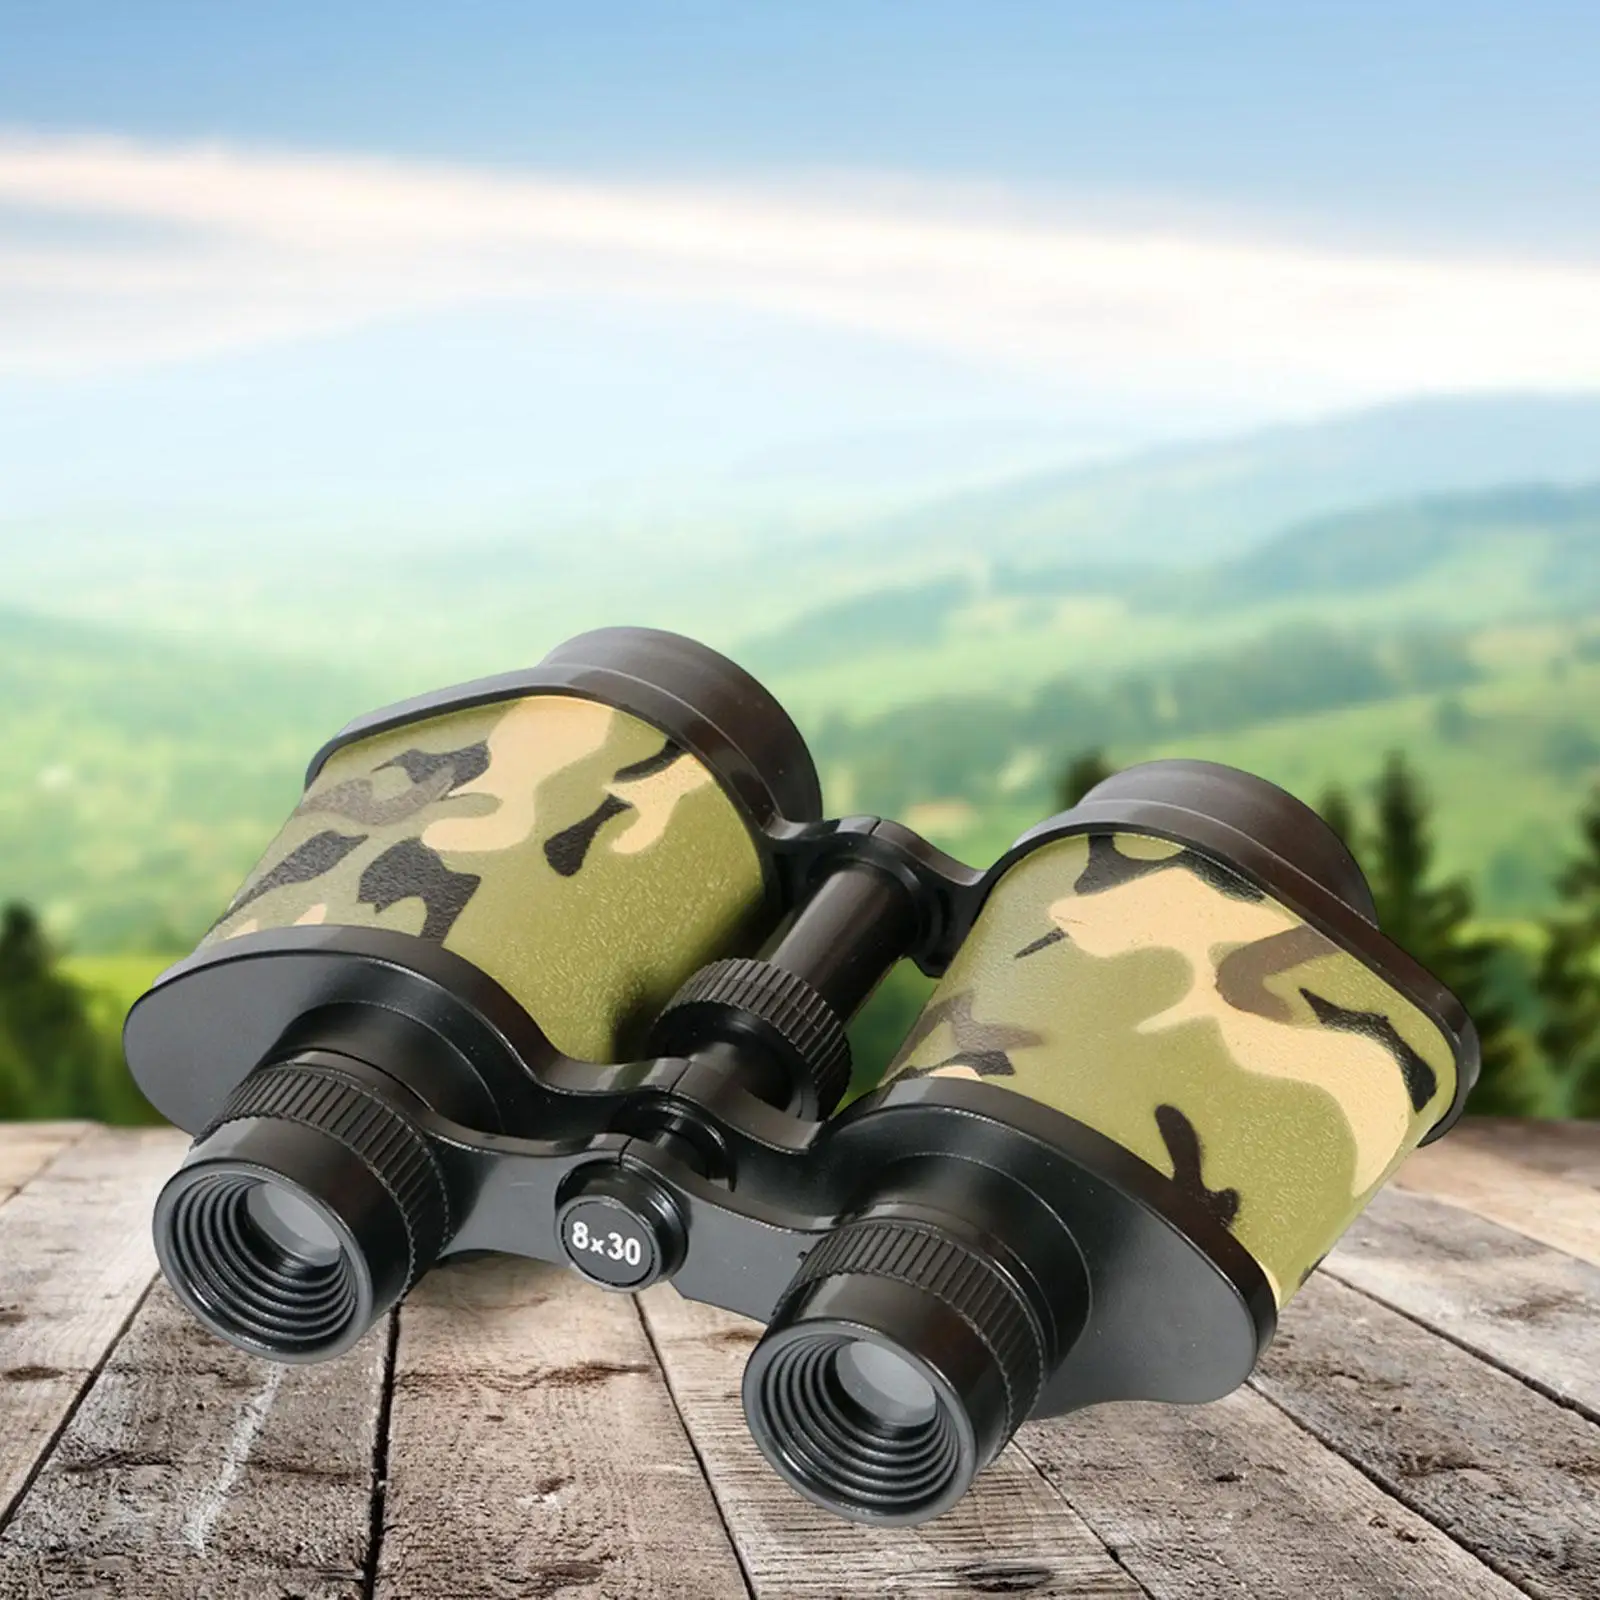 Kids Binoculars Toy 8x30 Professional for Insights Outdoor Activity Sports